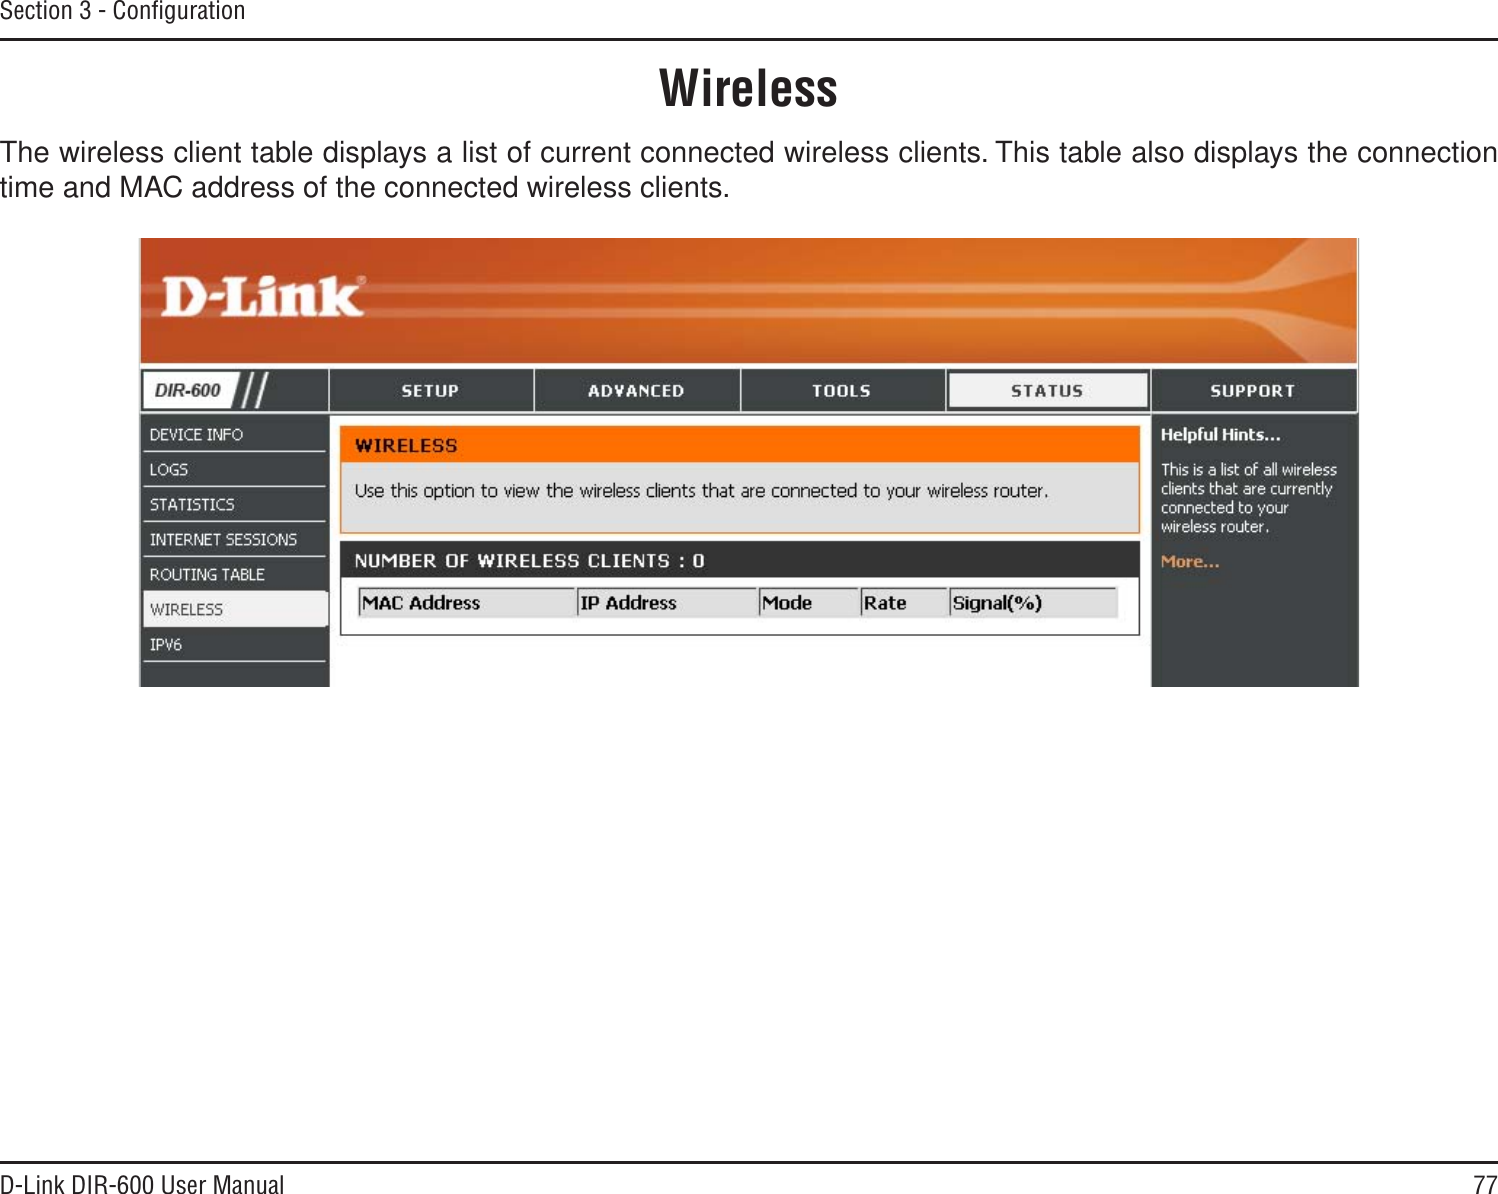 77D-Link DIR-600 User ManualSection 3 - ConﬁgurationThe wireless client table displays a list of current connected wireless clients. This table also displays the connection time and MAC address of the connected wireless clients.Wireless